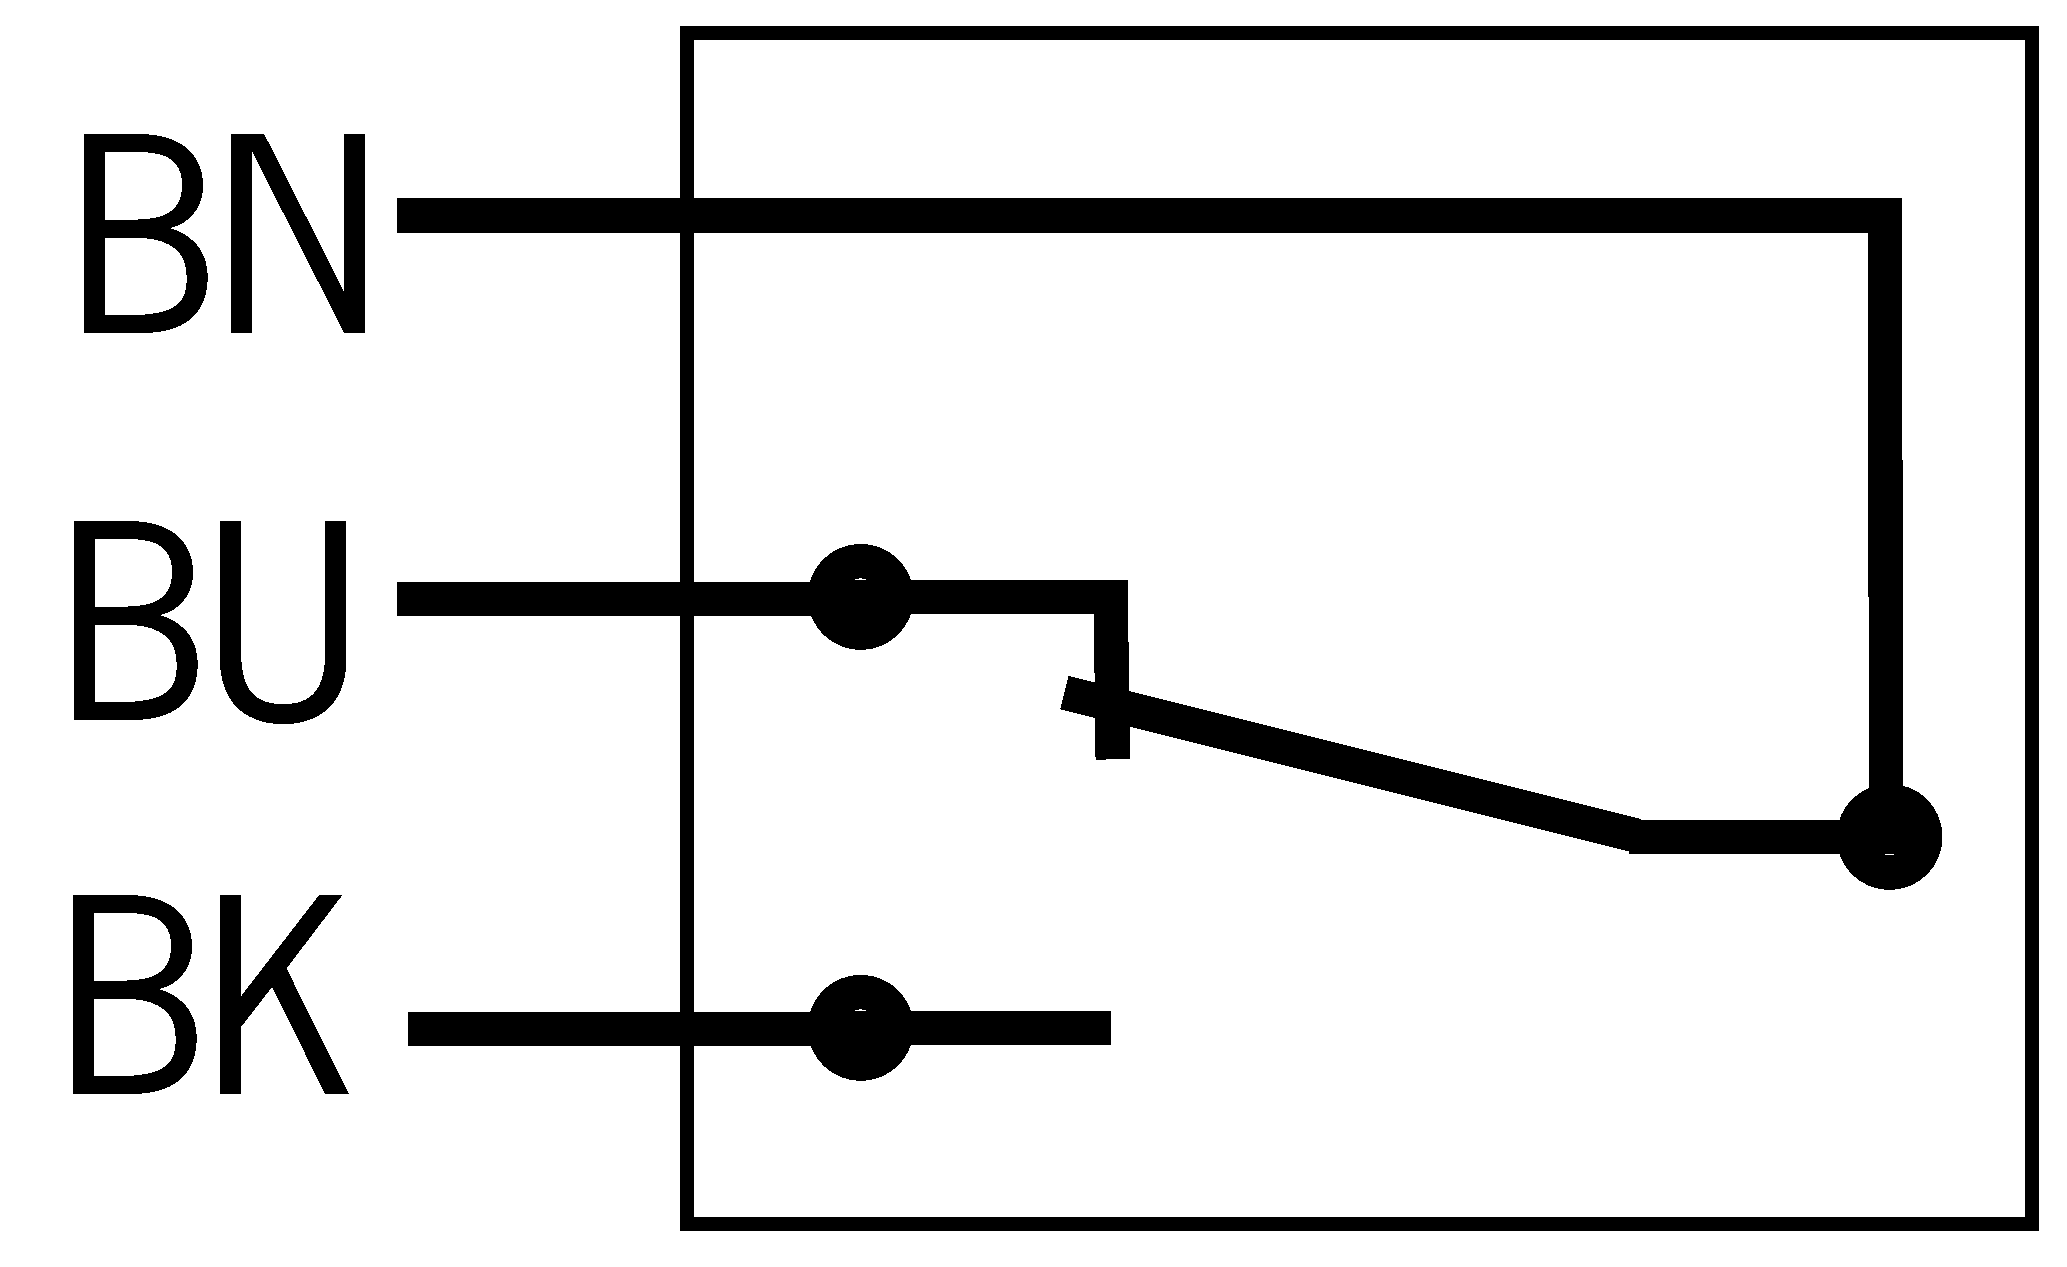 Connection examples